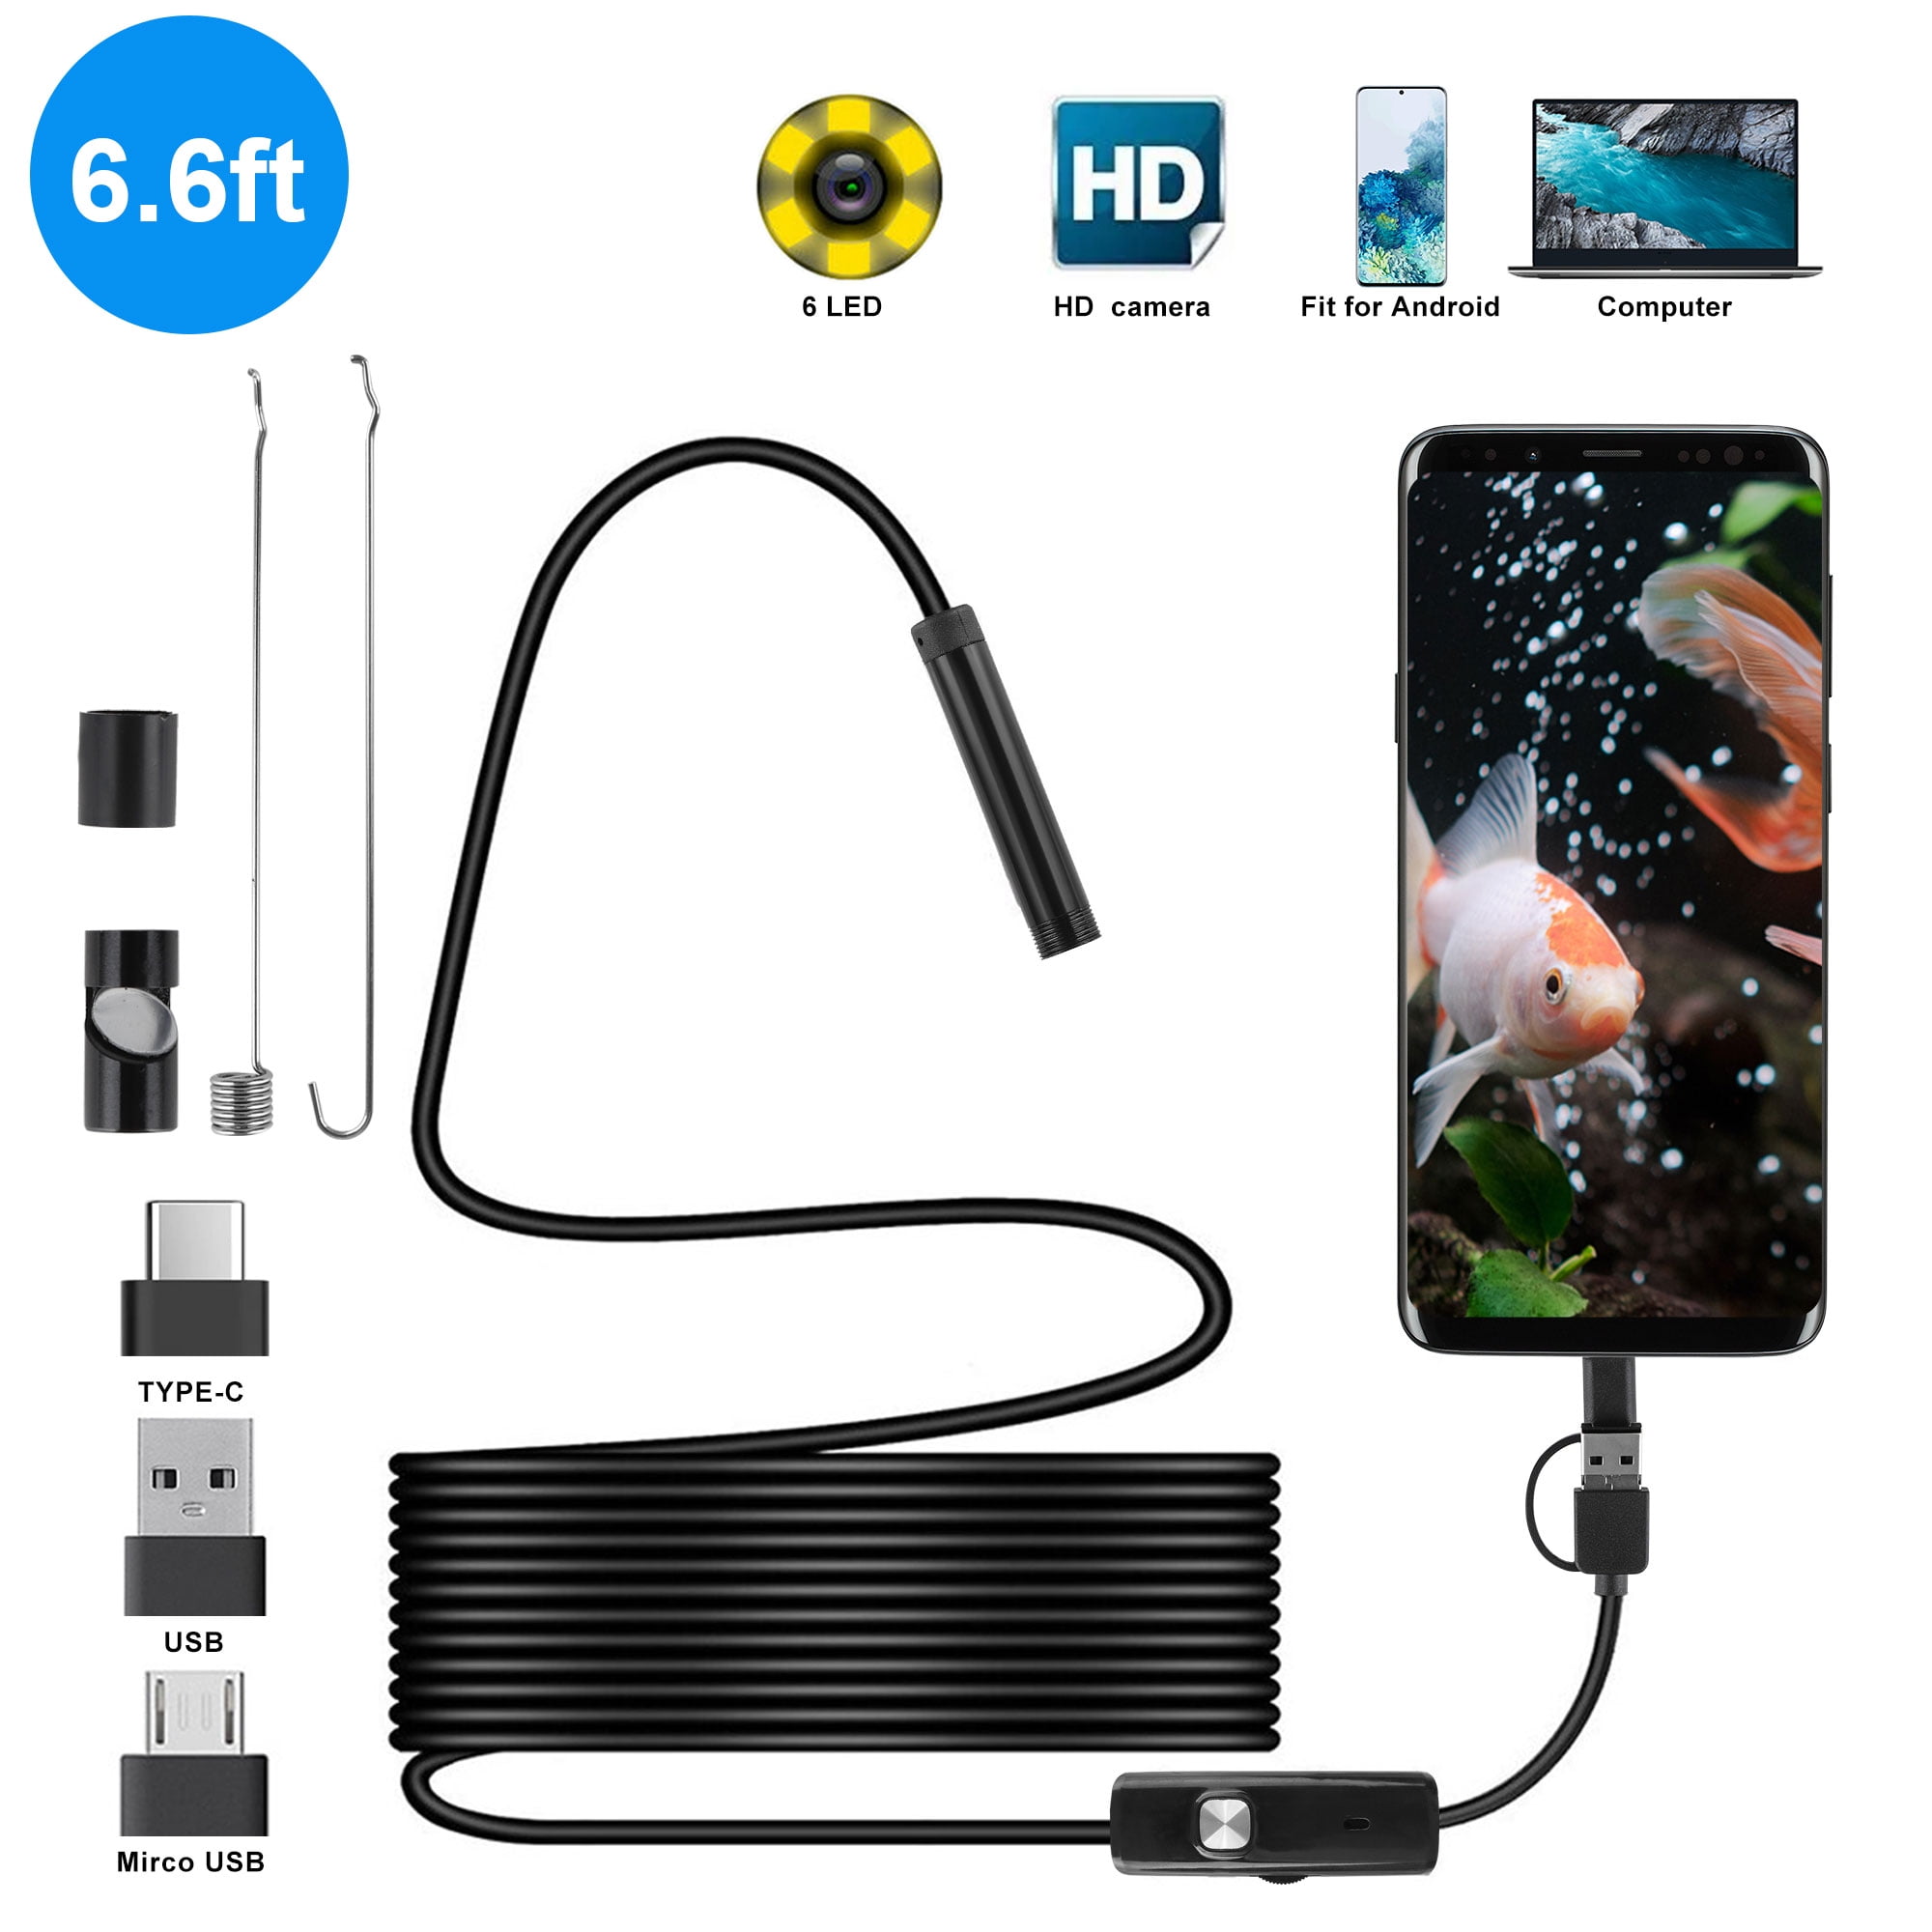 USB Type C Endoscope Review & Sample Video - AliExpress Cheap $4 Inspection  Camera 